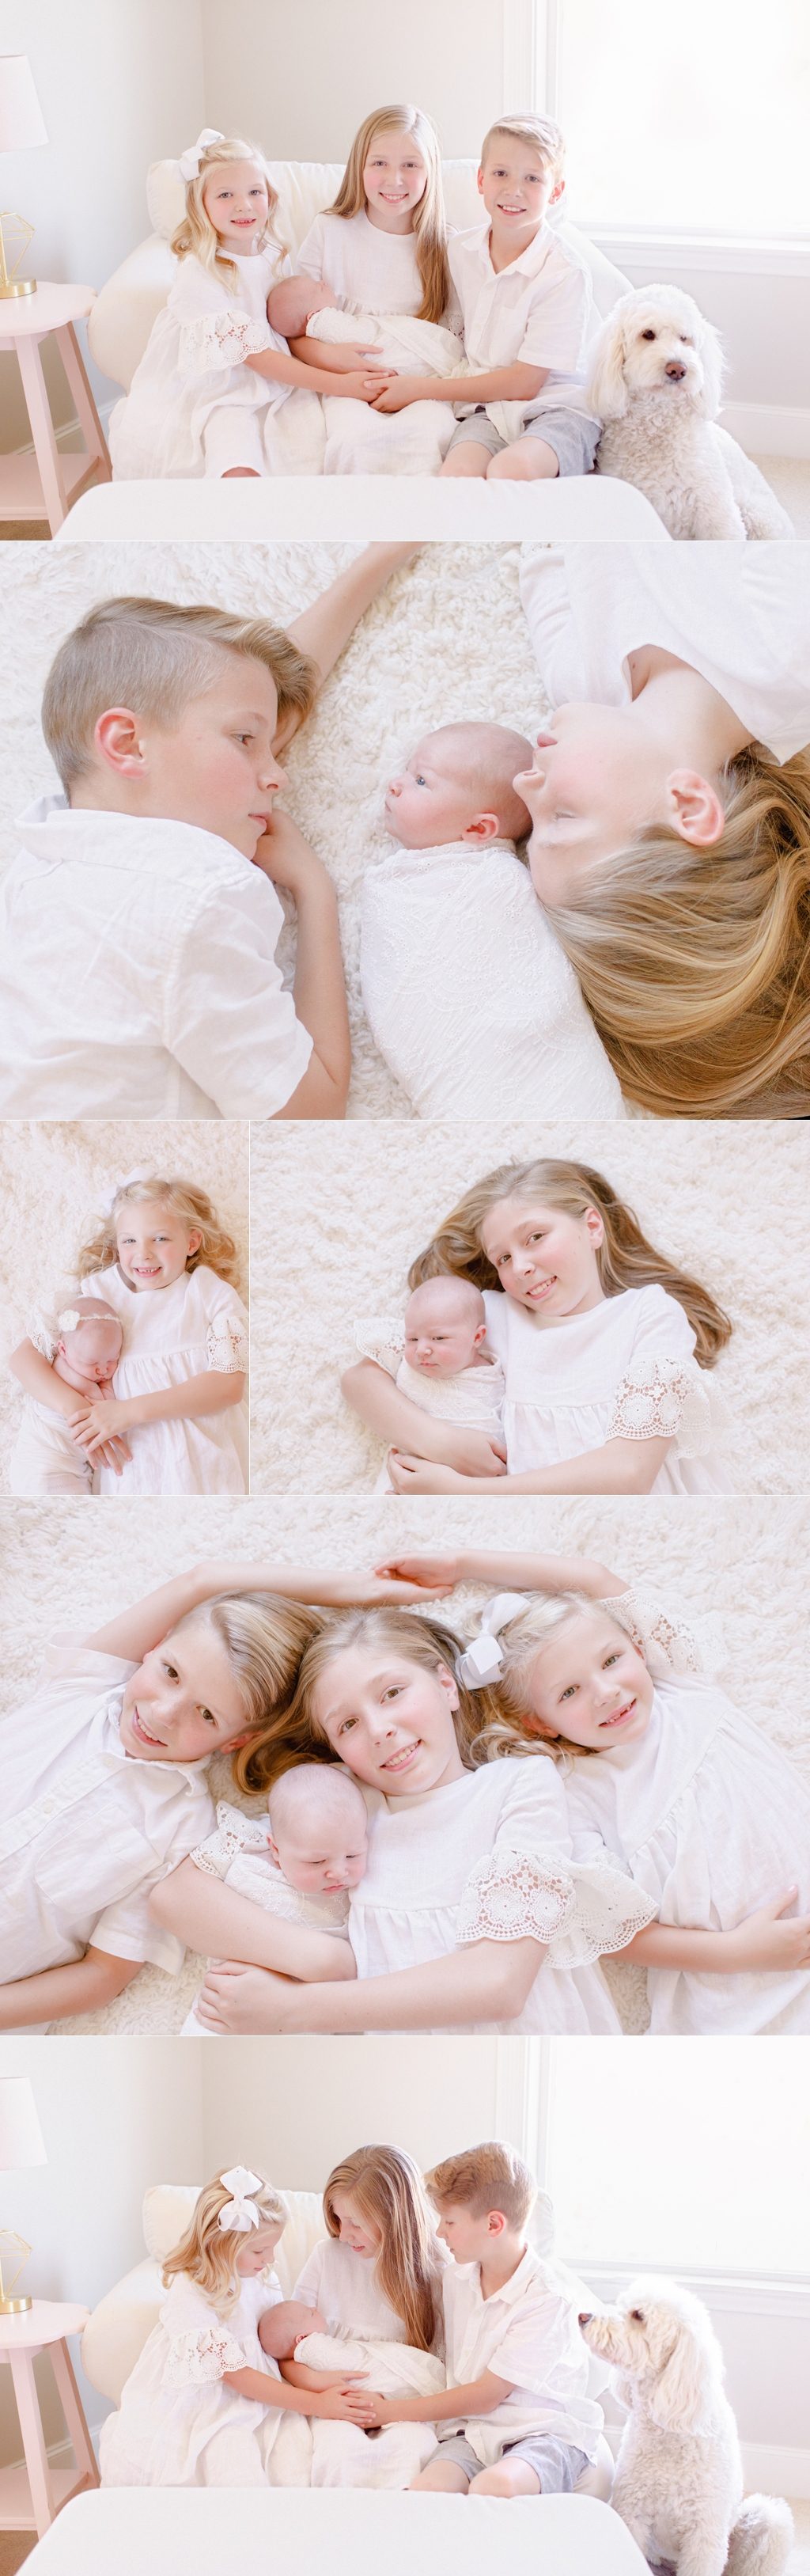 Examples of what siblings should wear for newborn photo session.